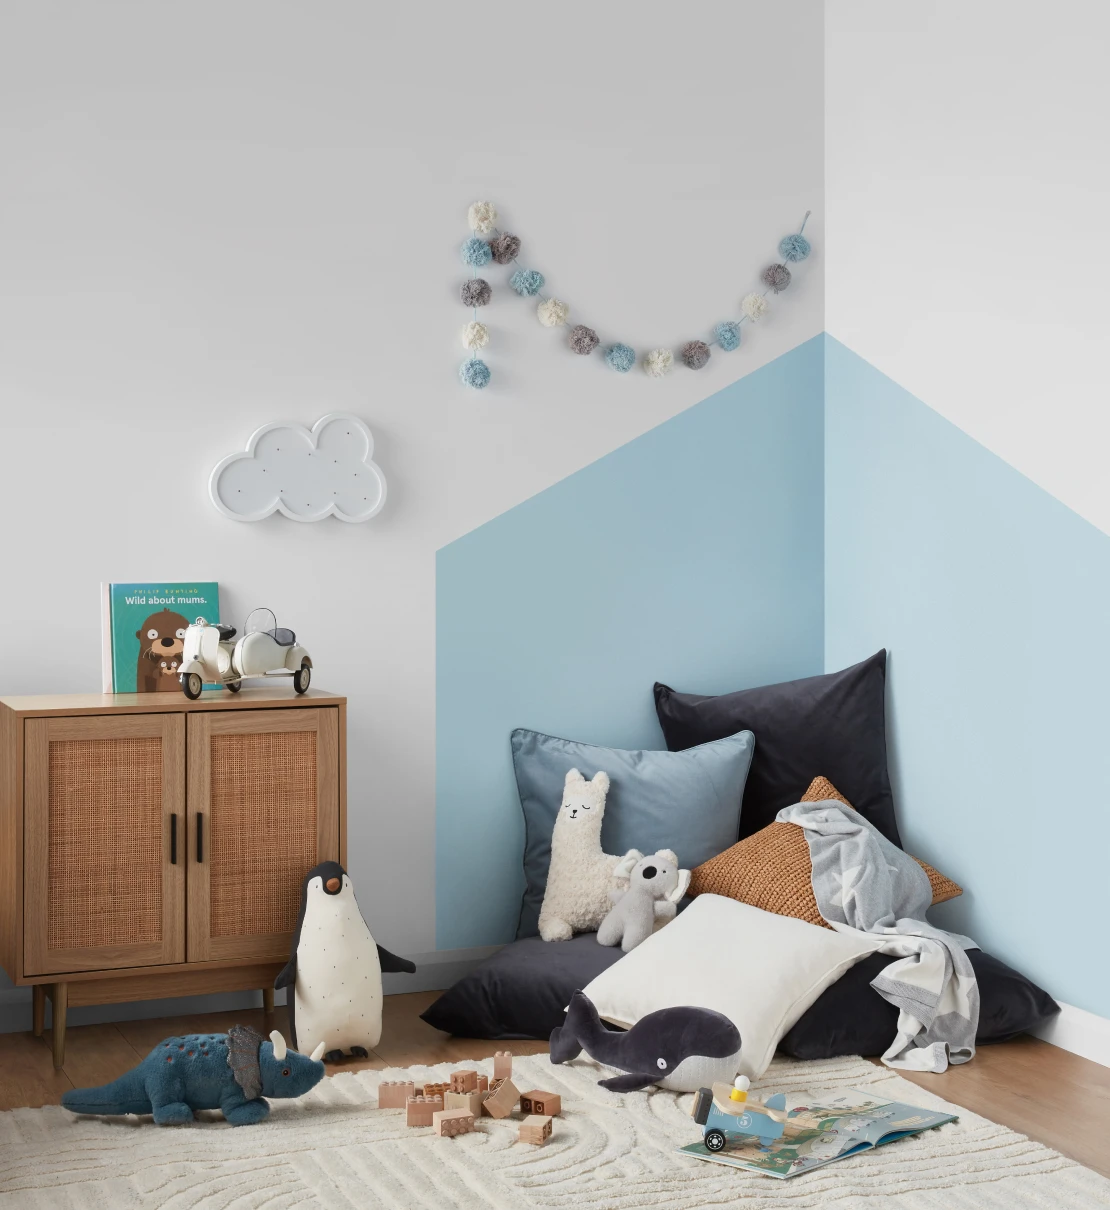 Fun guide to painting a kid's bedroom